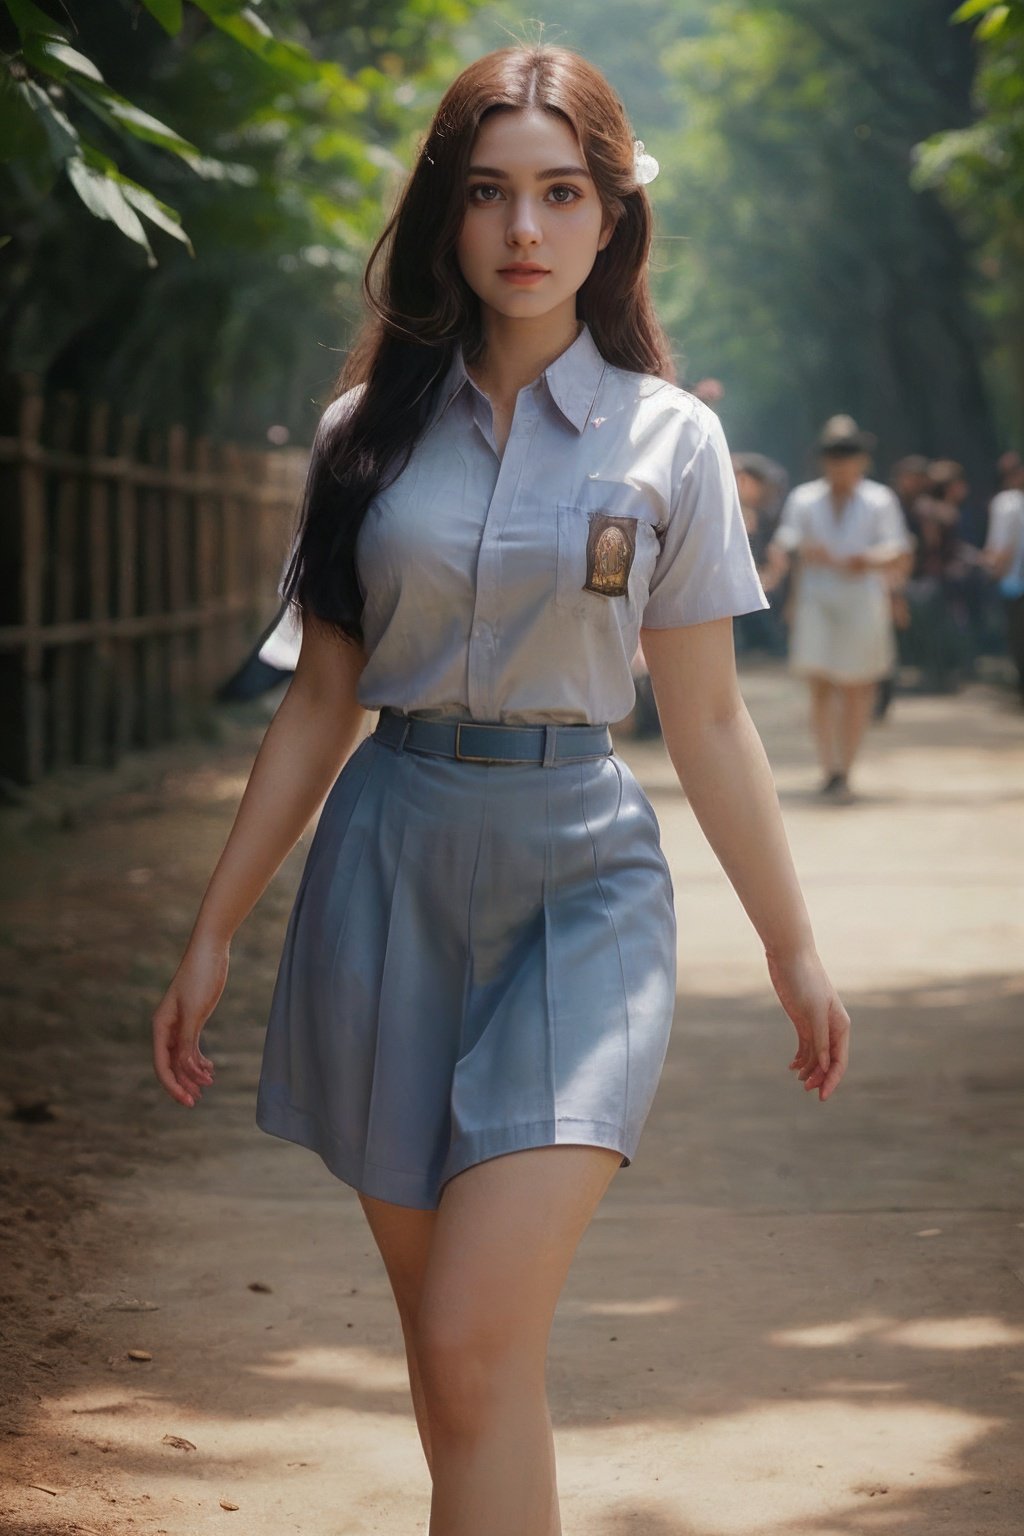 Hyperrealistic art cinematic photo ethereal fantasy concept art of sm4c3w3k, white clothes,full body  photo of the most beautiful bukub woman in the world wearing the sm4c3w3k, collared shirt,short sleeves, grey skirt, pocket,beautiful face,detail face,<lora:sm4c3w3k-05:1>  . magnificent, celestial, ethereal, painterly, epic, majestic, magical, fantasy art, cover art, dreamy . 35mm photograph, film, bokeh, professional, 4k, highly detailed . Extremely high-resolution details, photographic, realism pushed to extreme, fine texture, incredibly lifelike